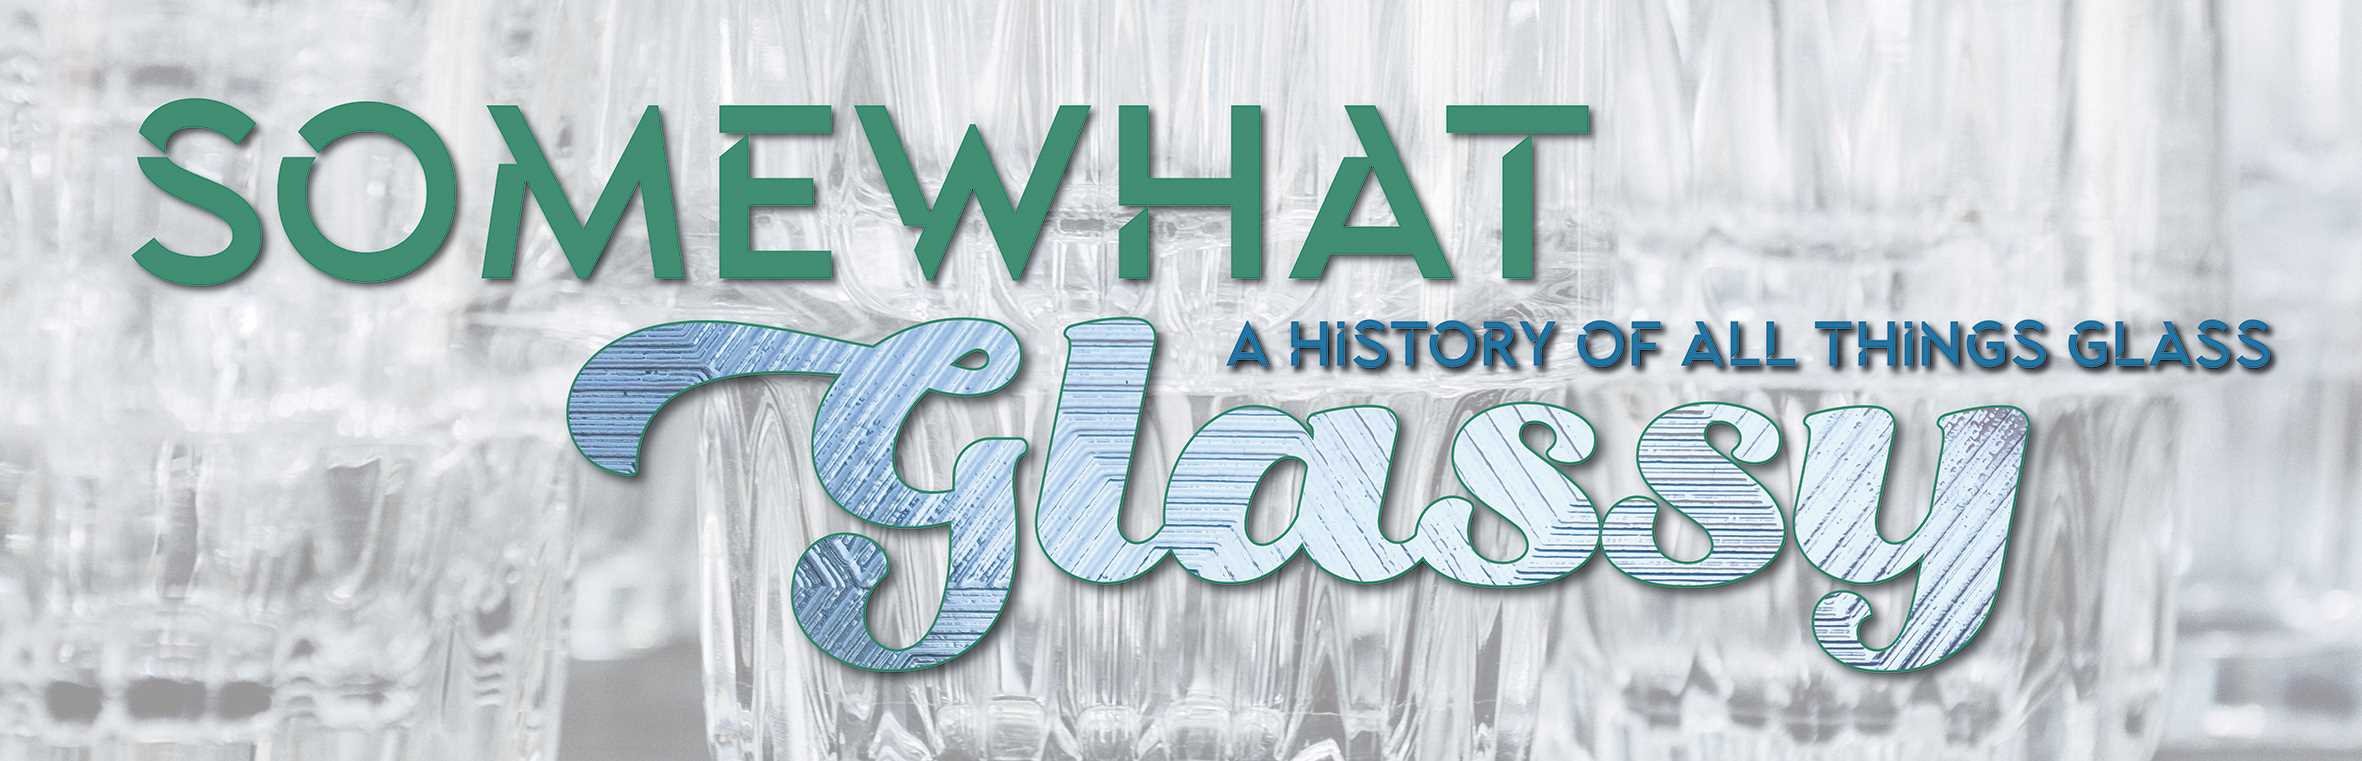 Somewhat Glassy - A History of all things glass' Exhibition